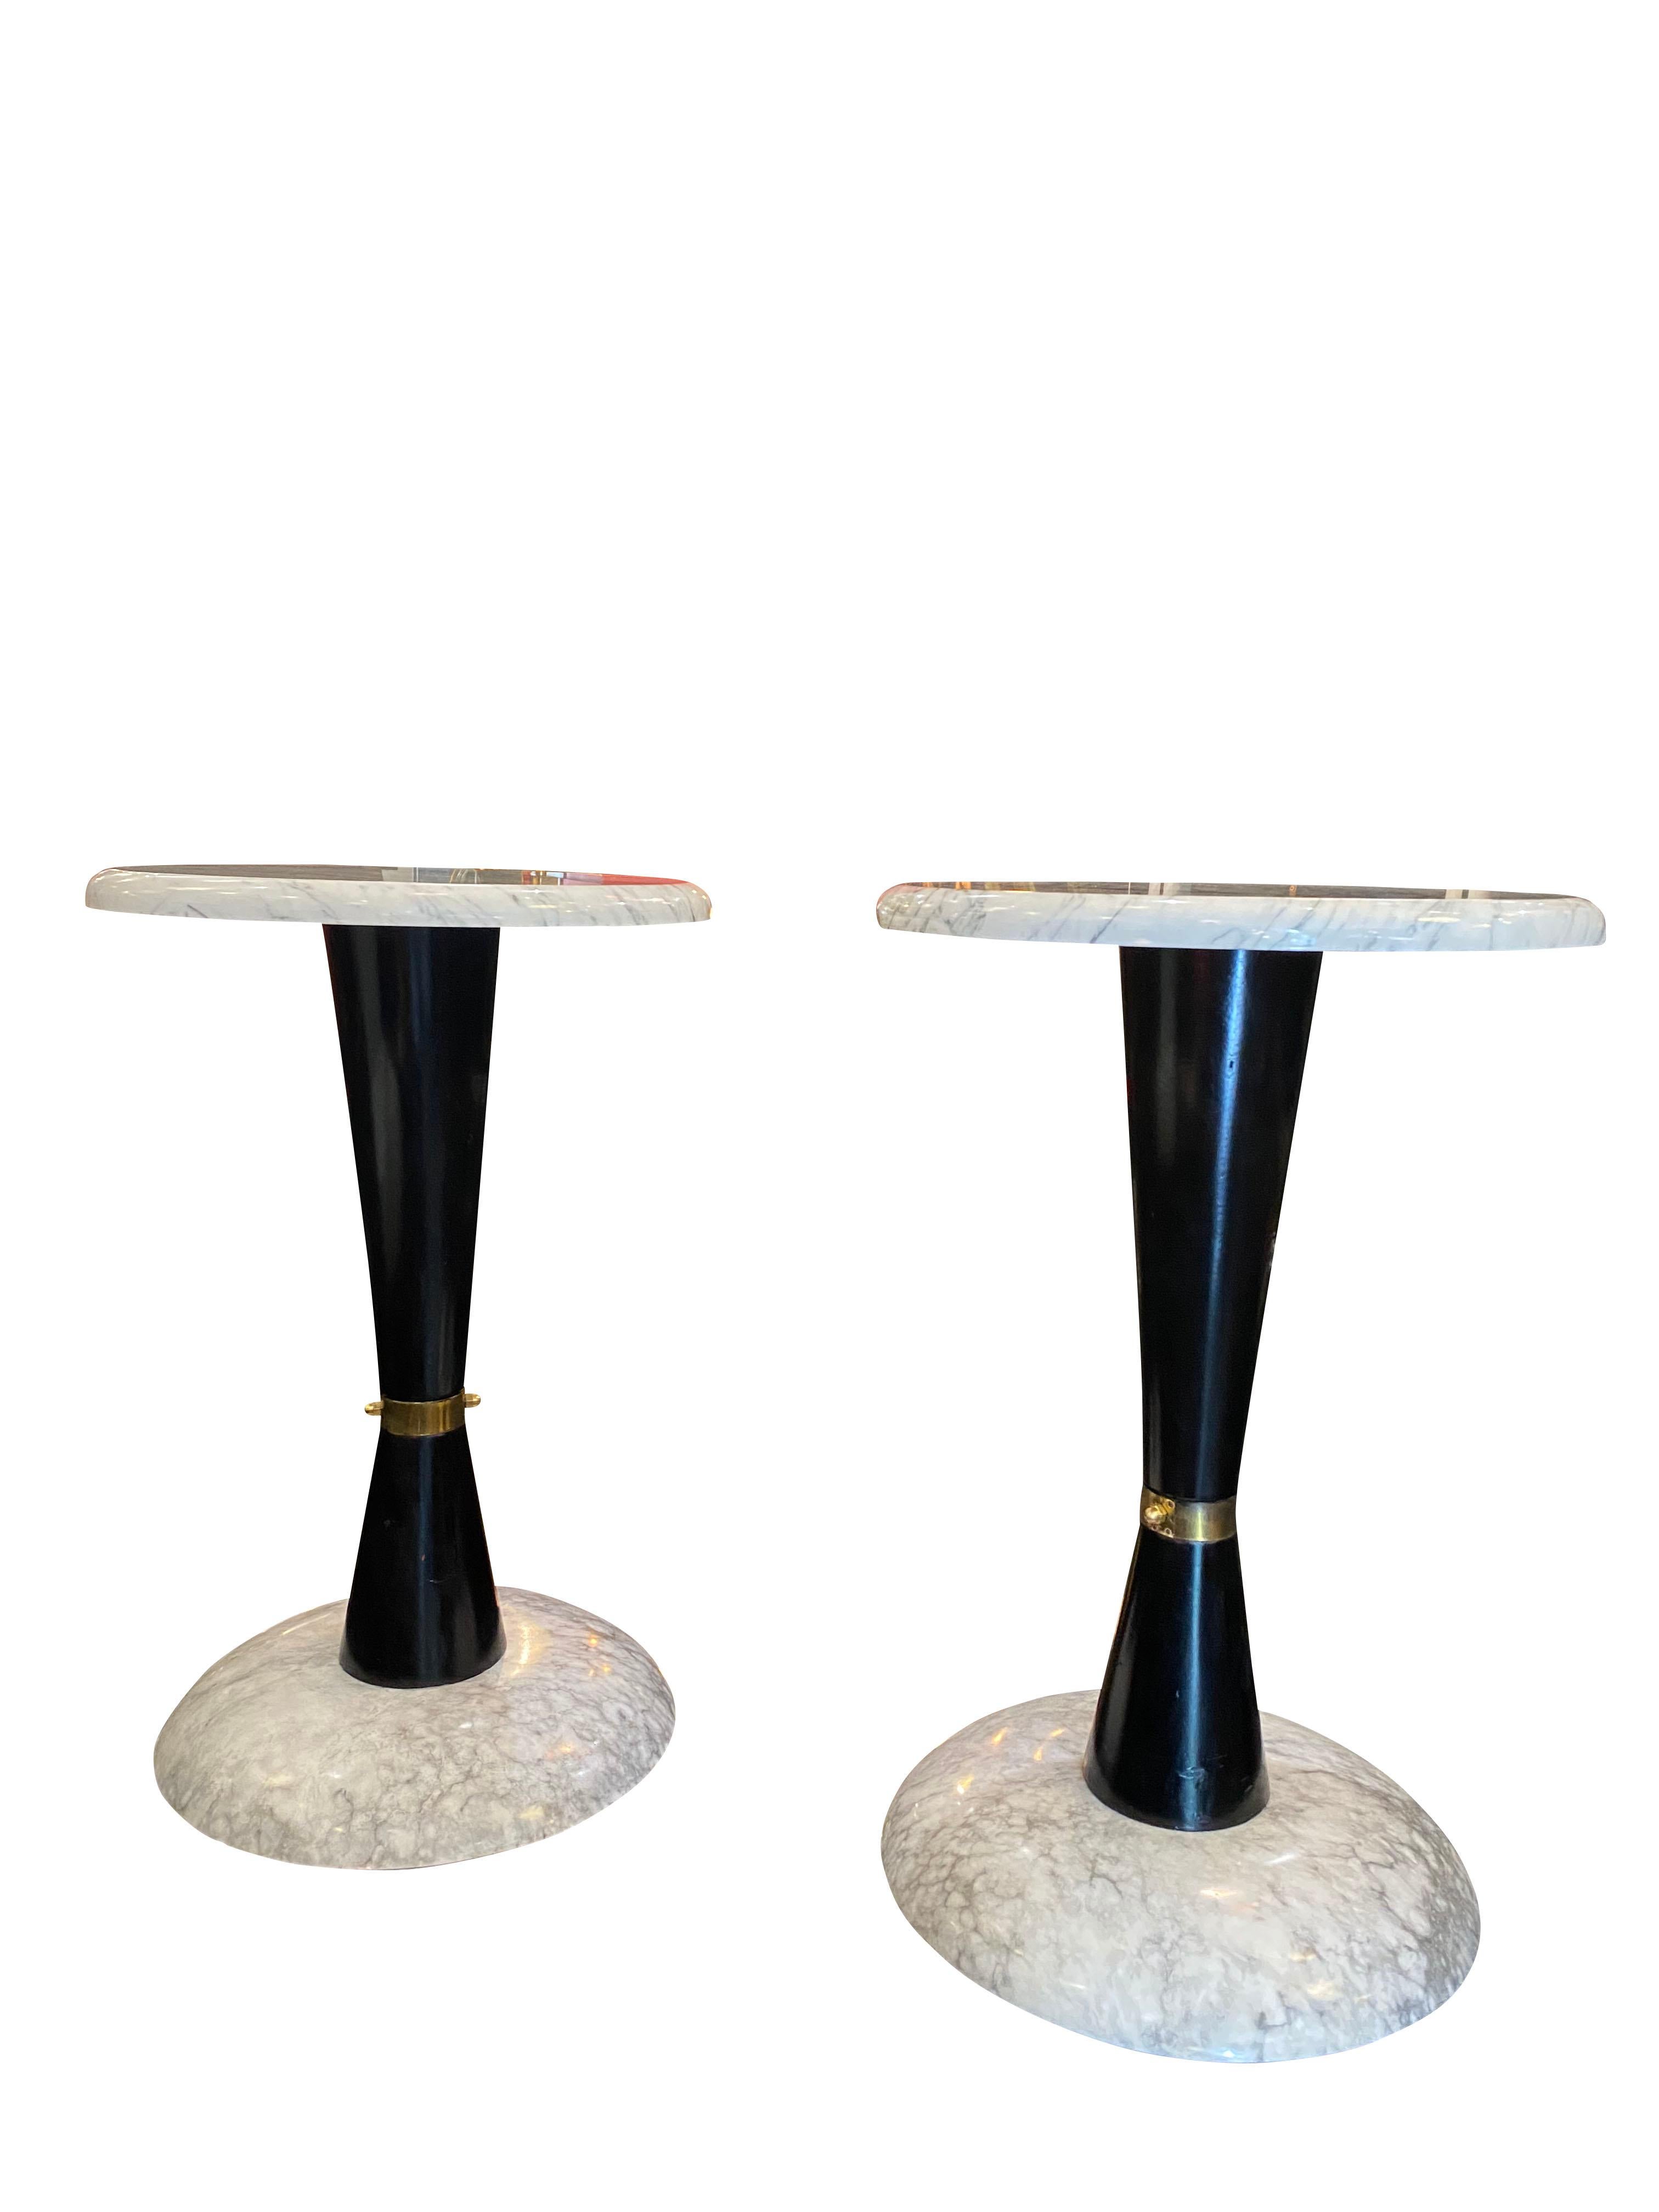 An imposing pair of 1950s side tables in Italian Carrara marble standing on black lacquered wood with brass detailing.

  